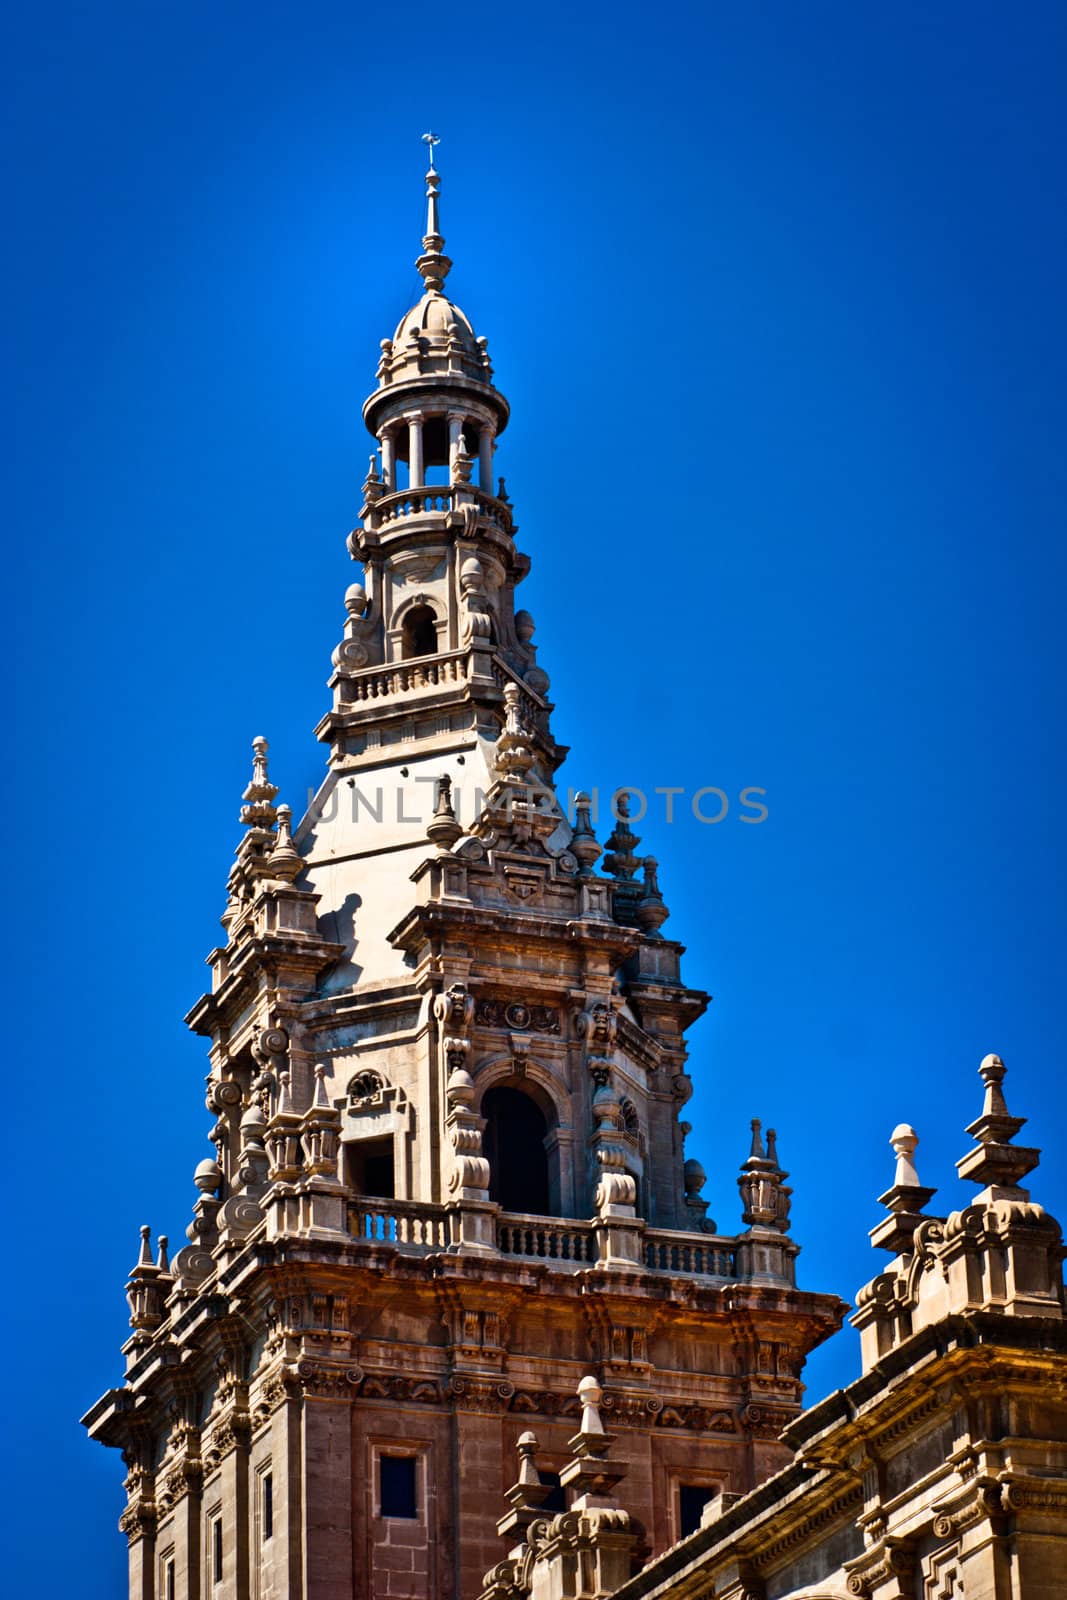 Top of cathedral in Spain against the clear blue sky